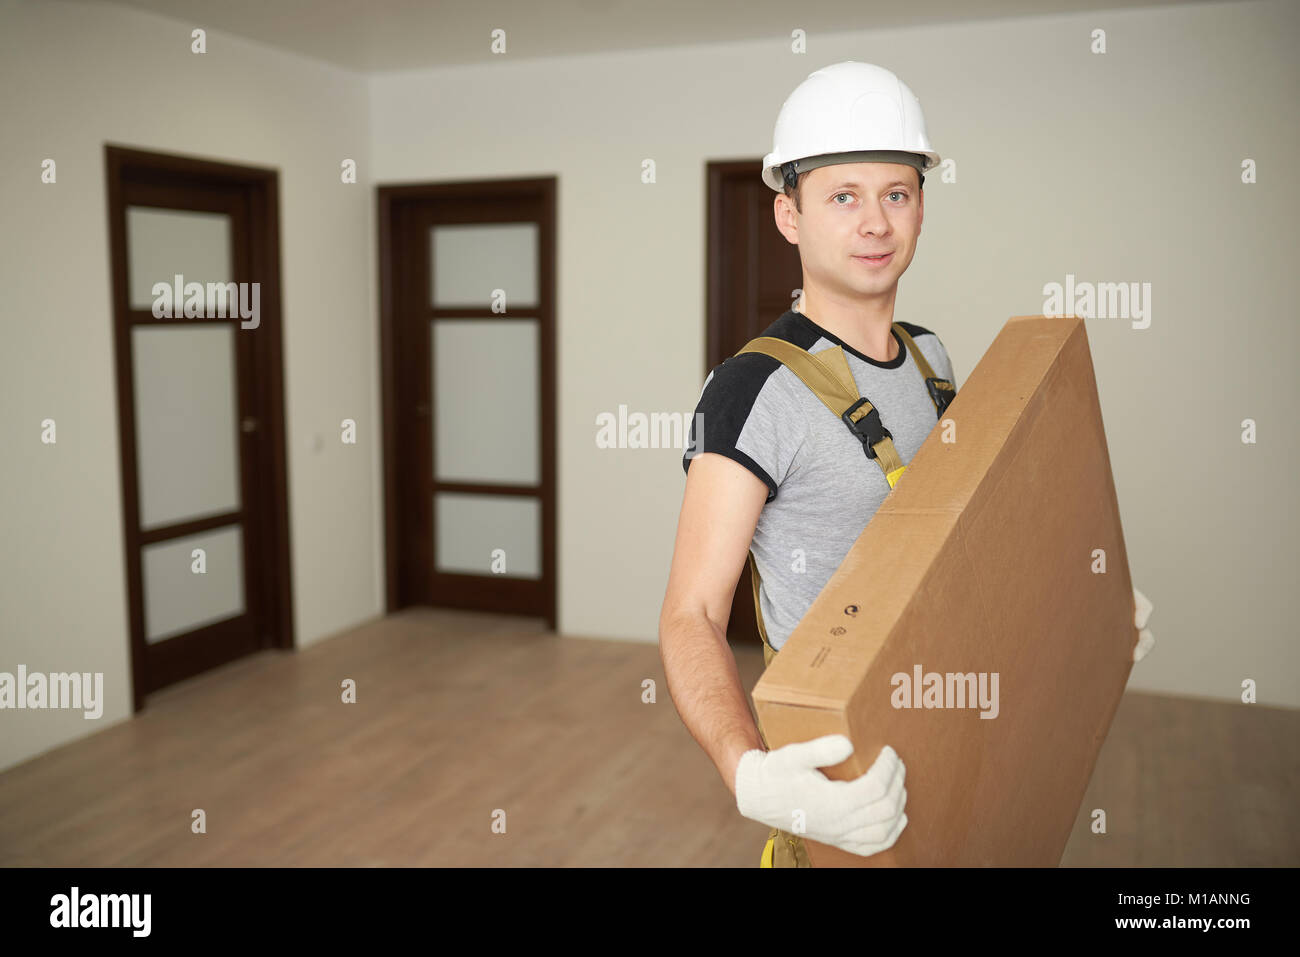 Delivery man with box indoors. Furniture delivery background. Stock Photo